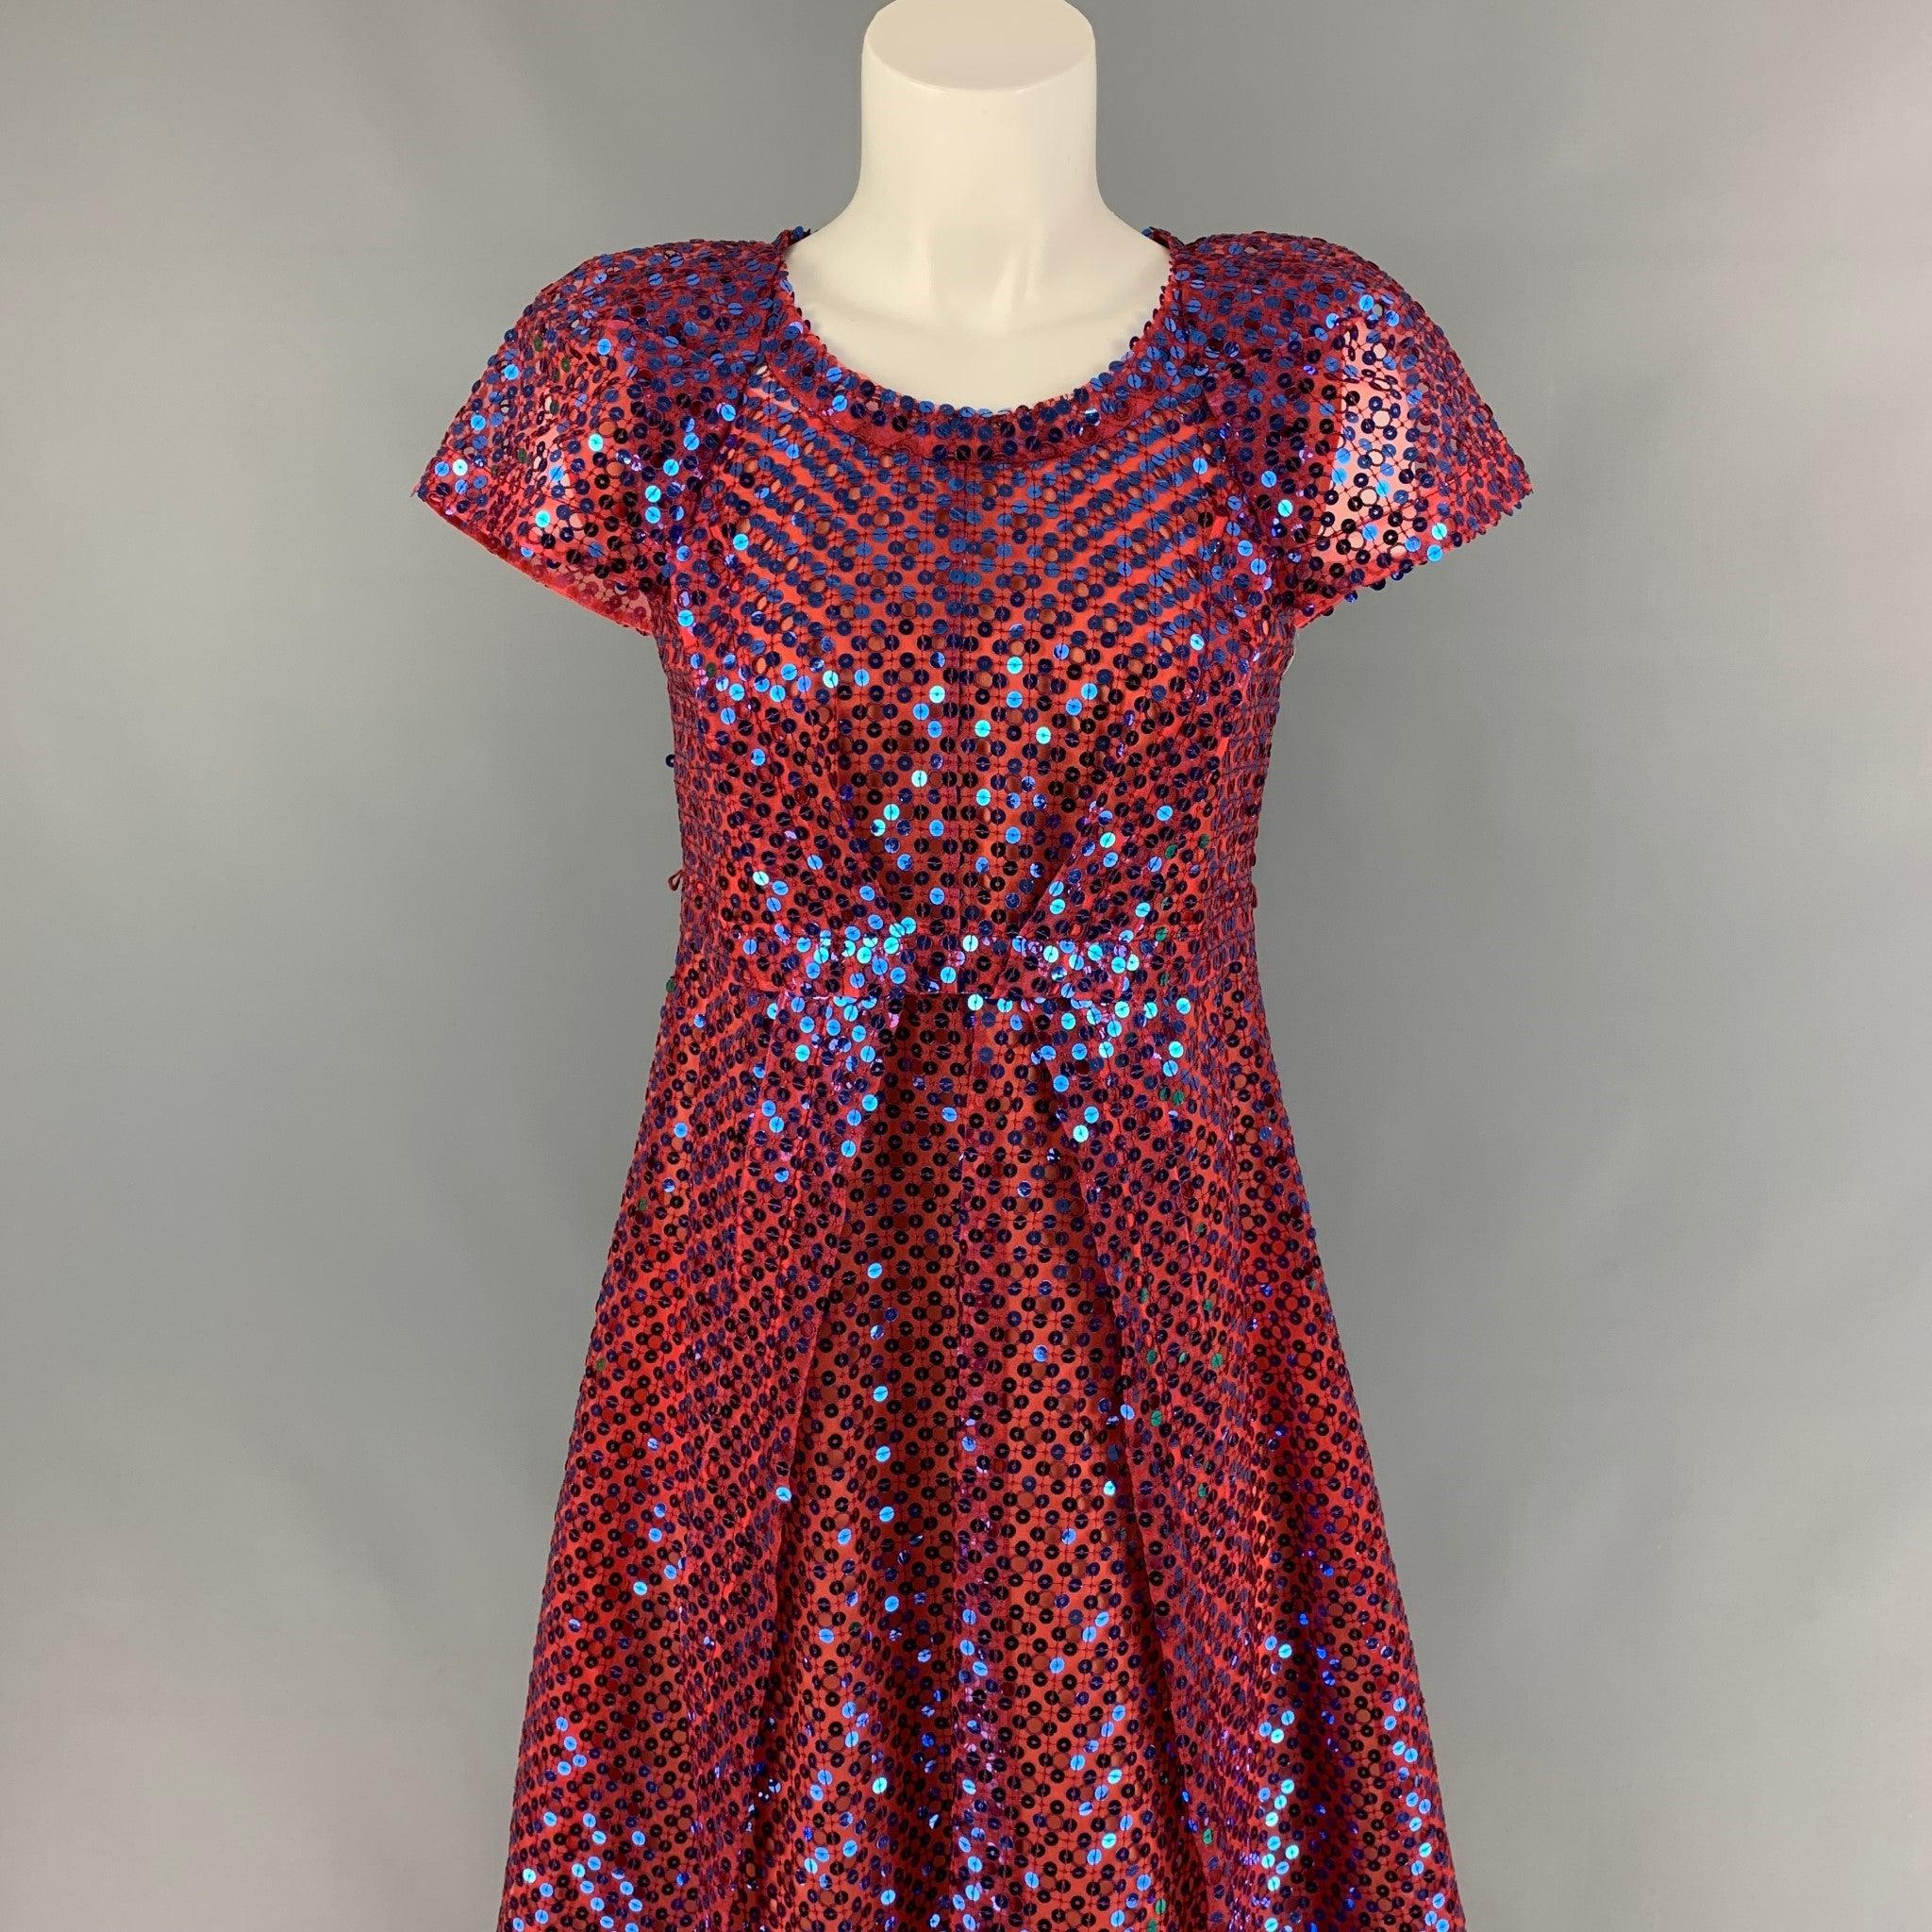 MARC JACOBS dress comes in a orange & blue sequined polyester blend with a slip liner featuring a shift style, pleated, cap sleeves, and a back zip up closure. Made in USA.
New With Tags. 

Marked:   2 

Measurements: 
 
Shoulder: 14.5 inches  Bust: